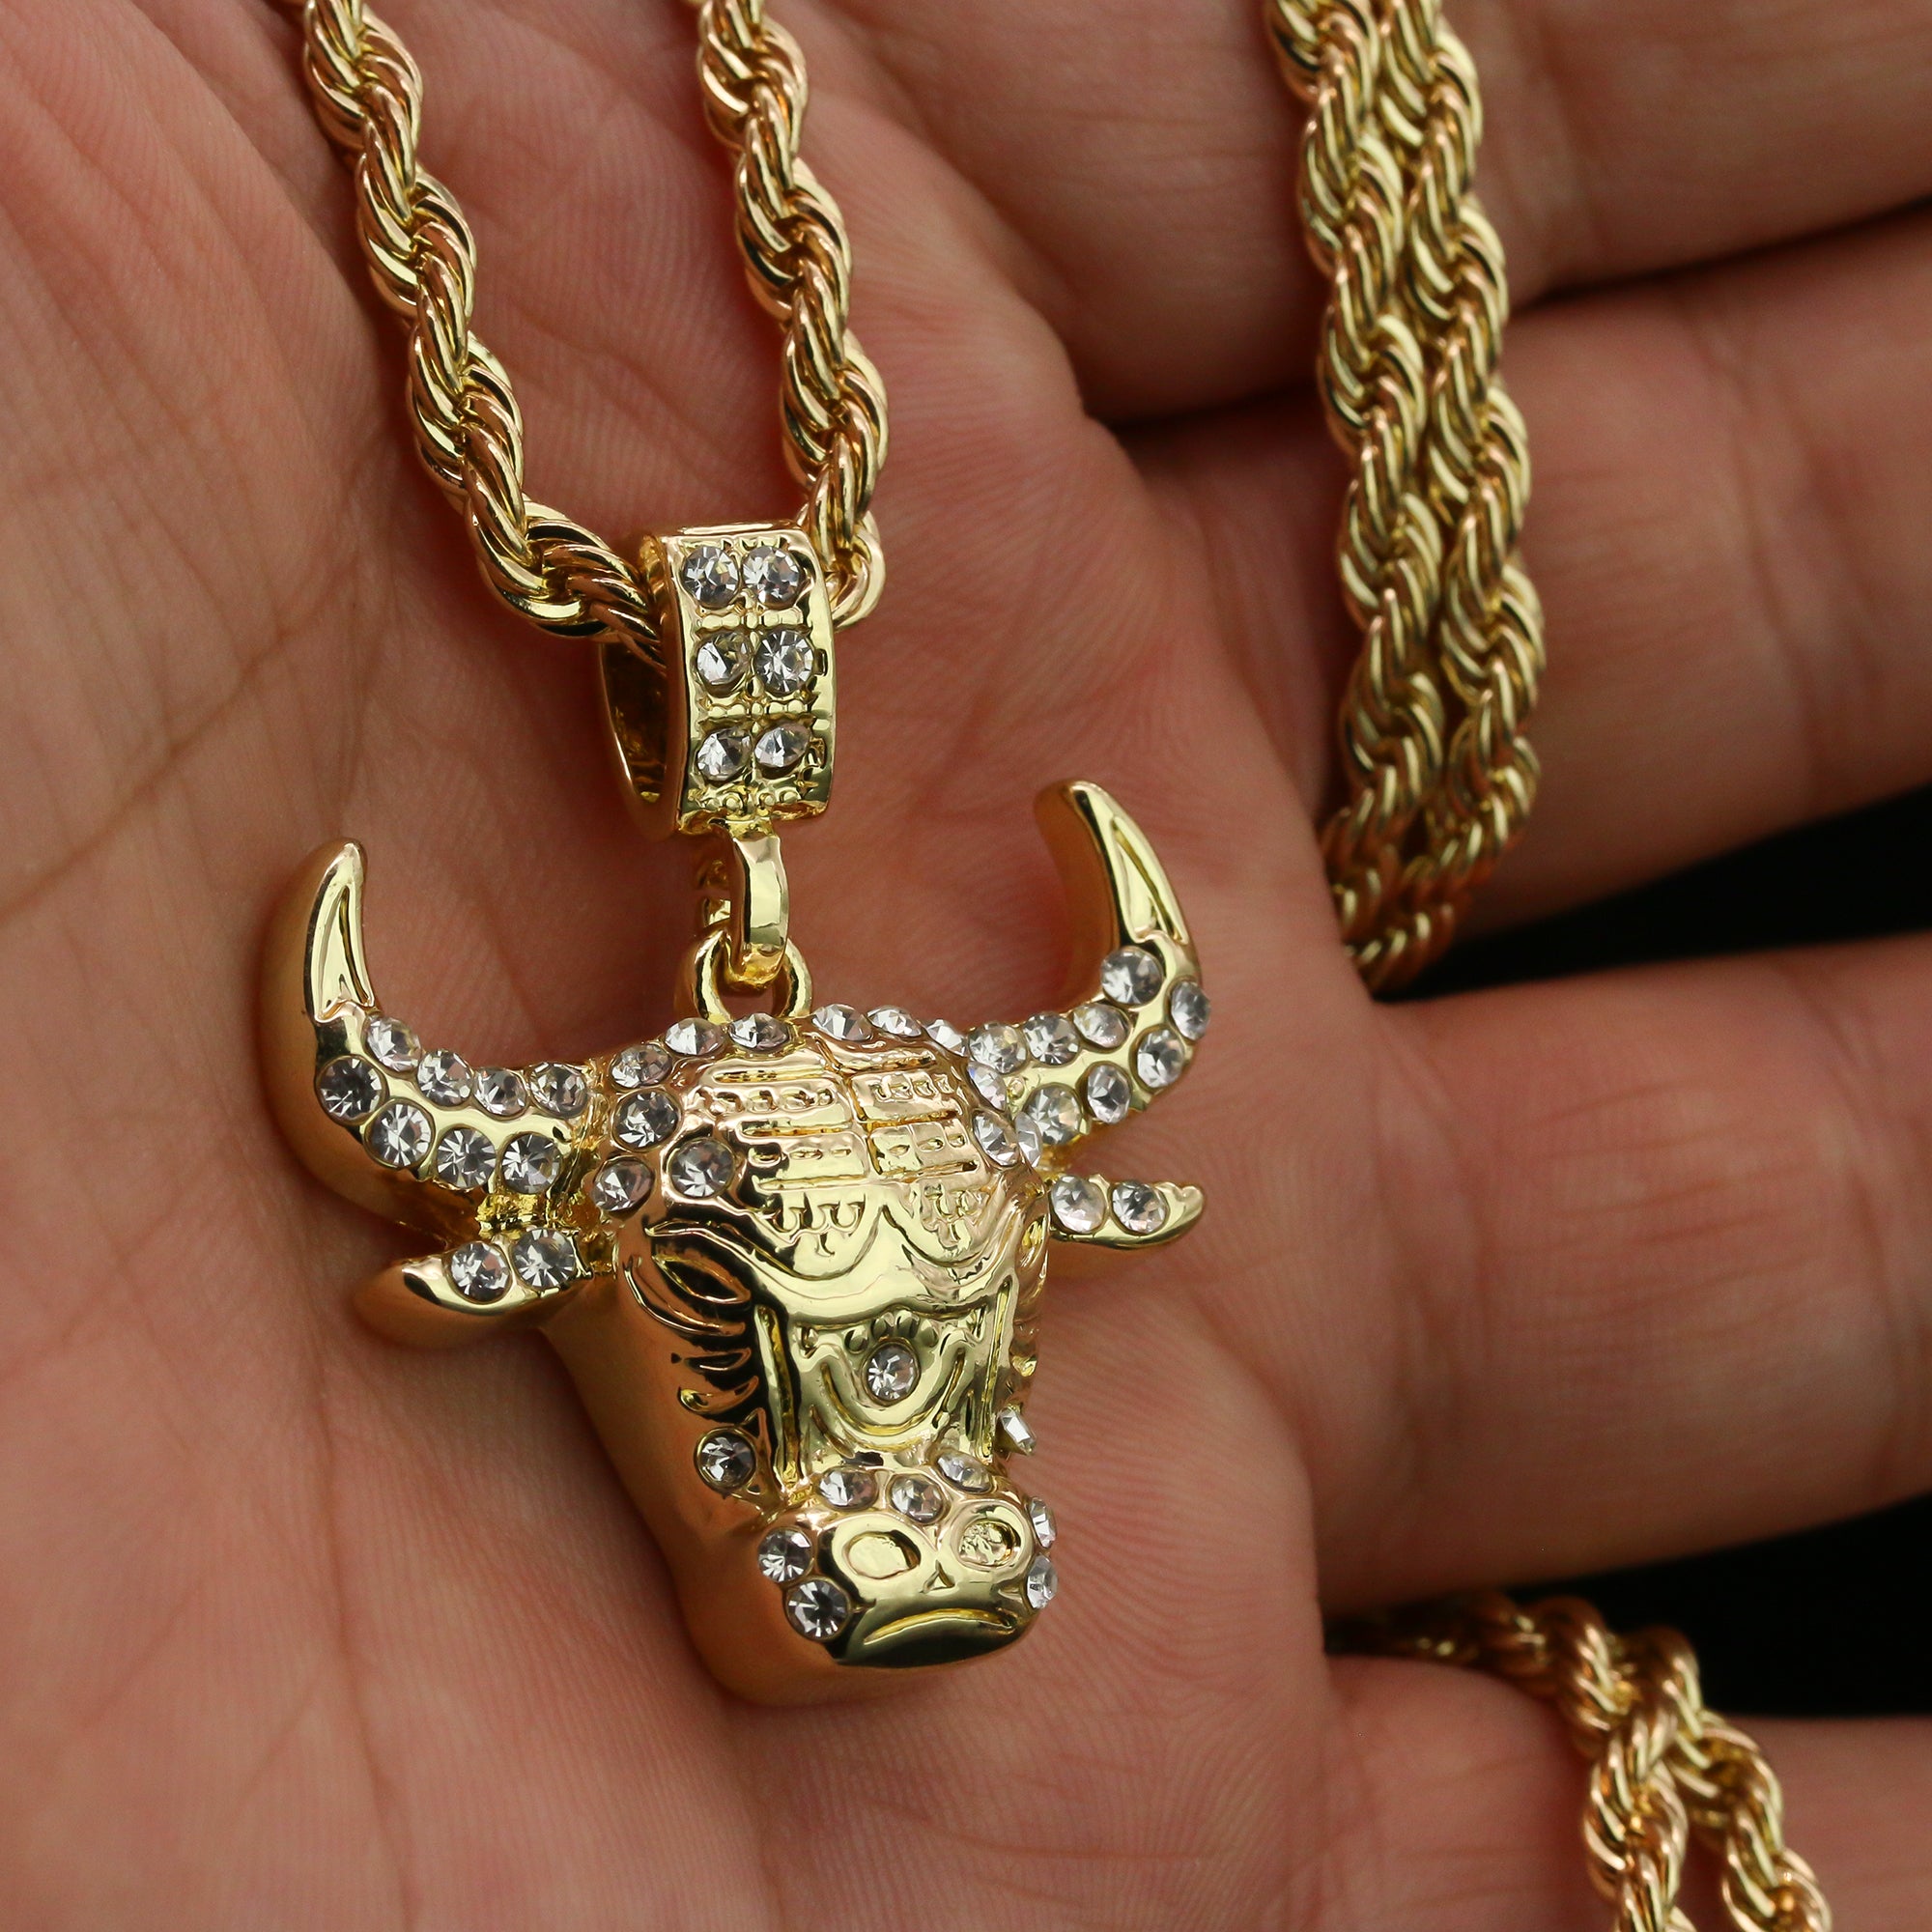 Cz Bull Pendant 24" Rope Chain Hip Hop 18k Jewelry Necklace